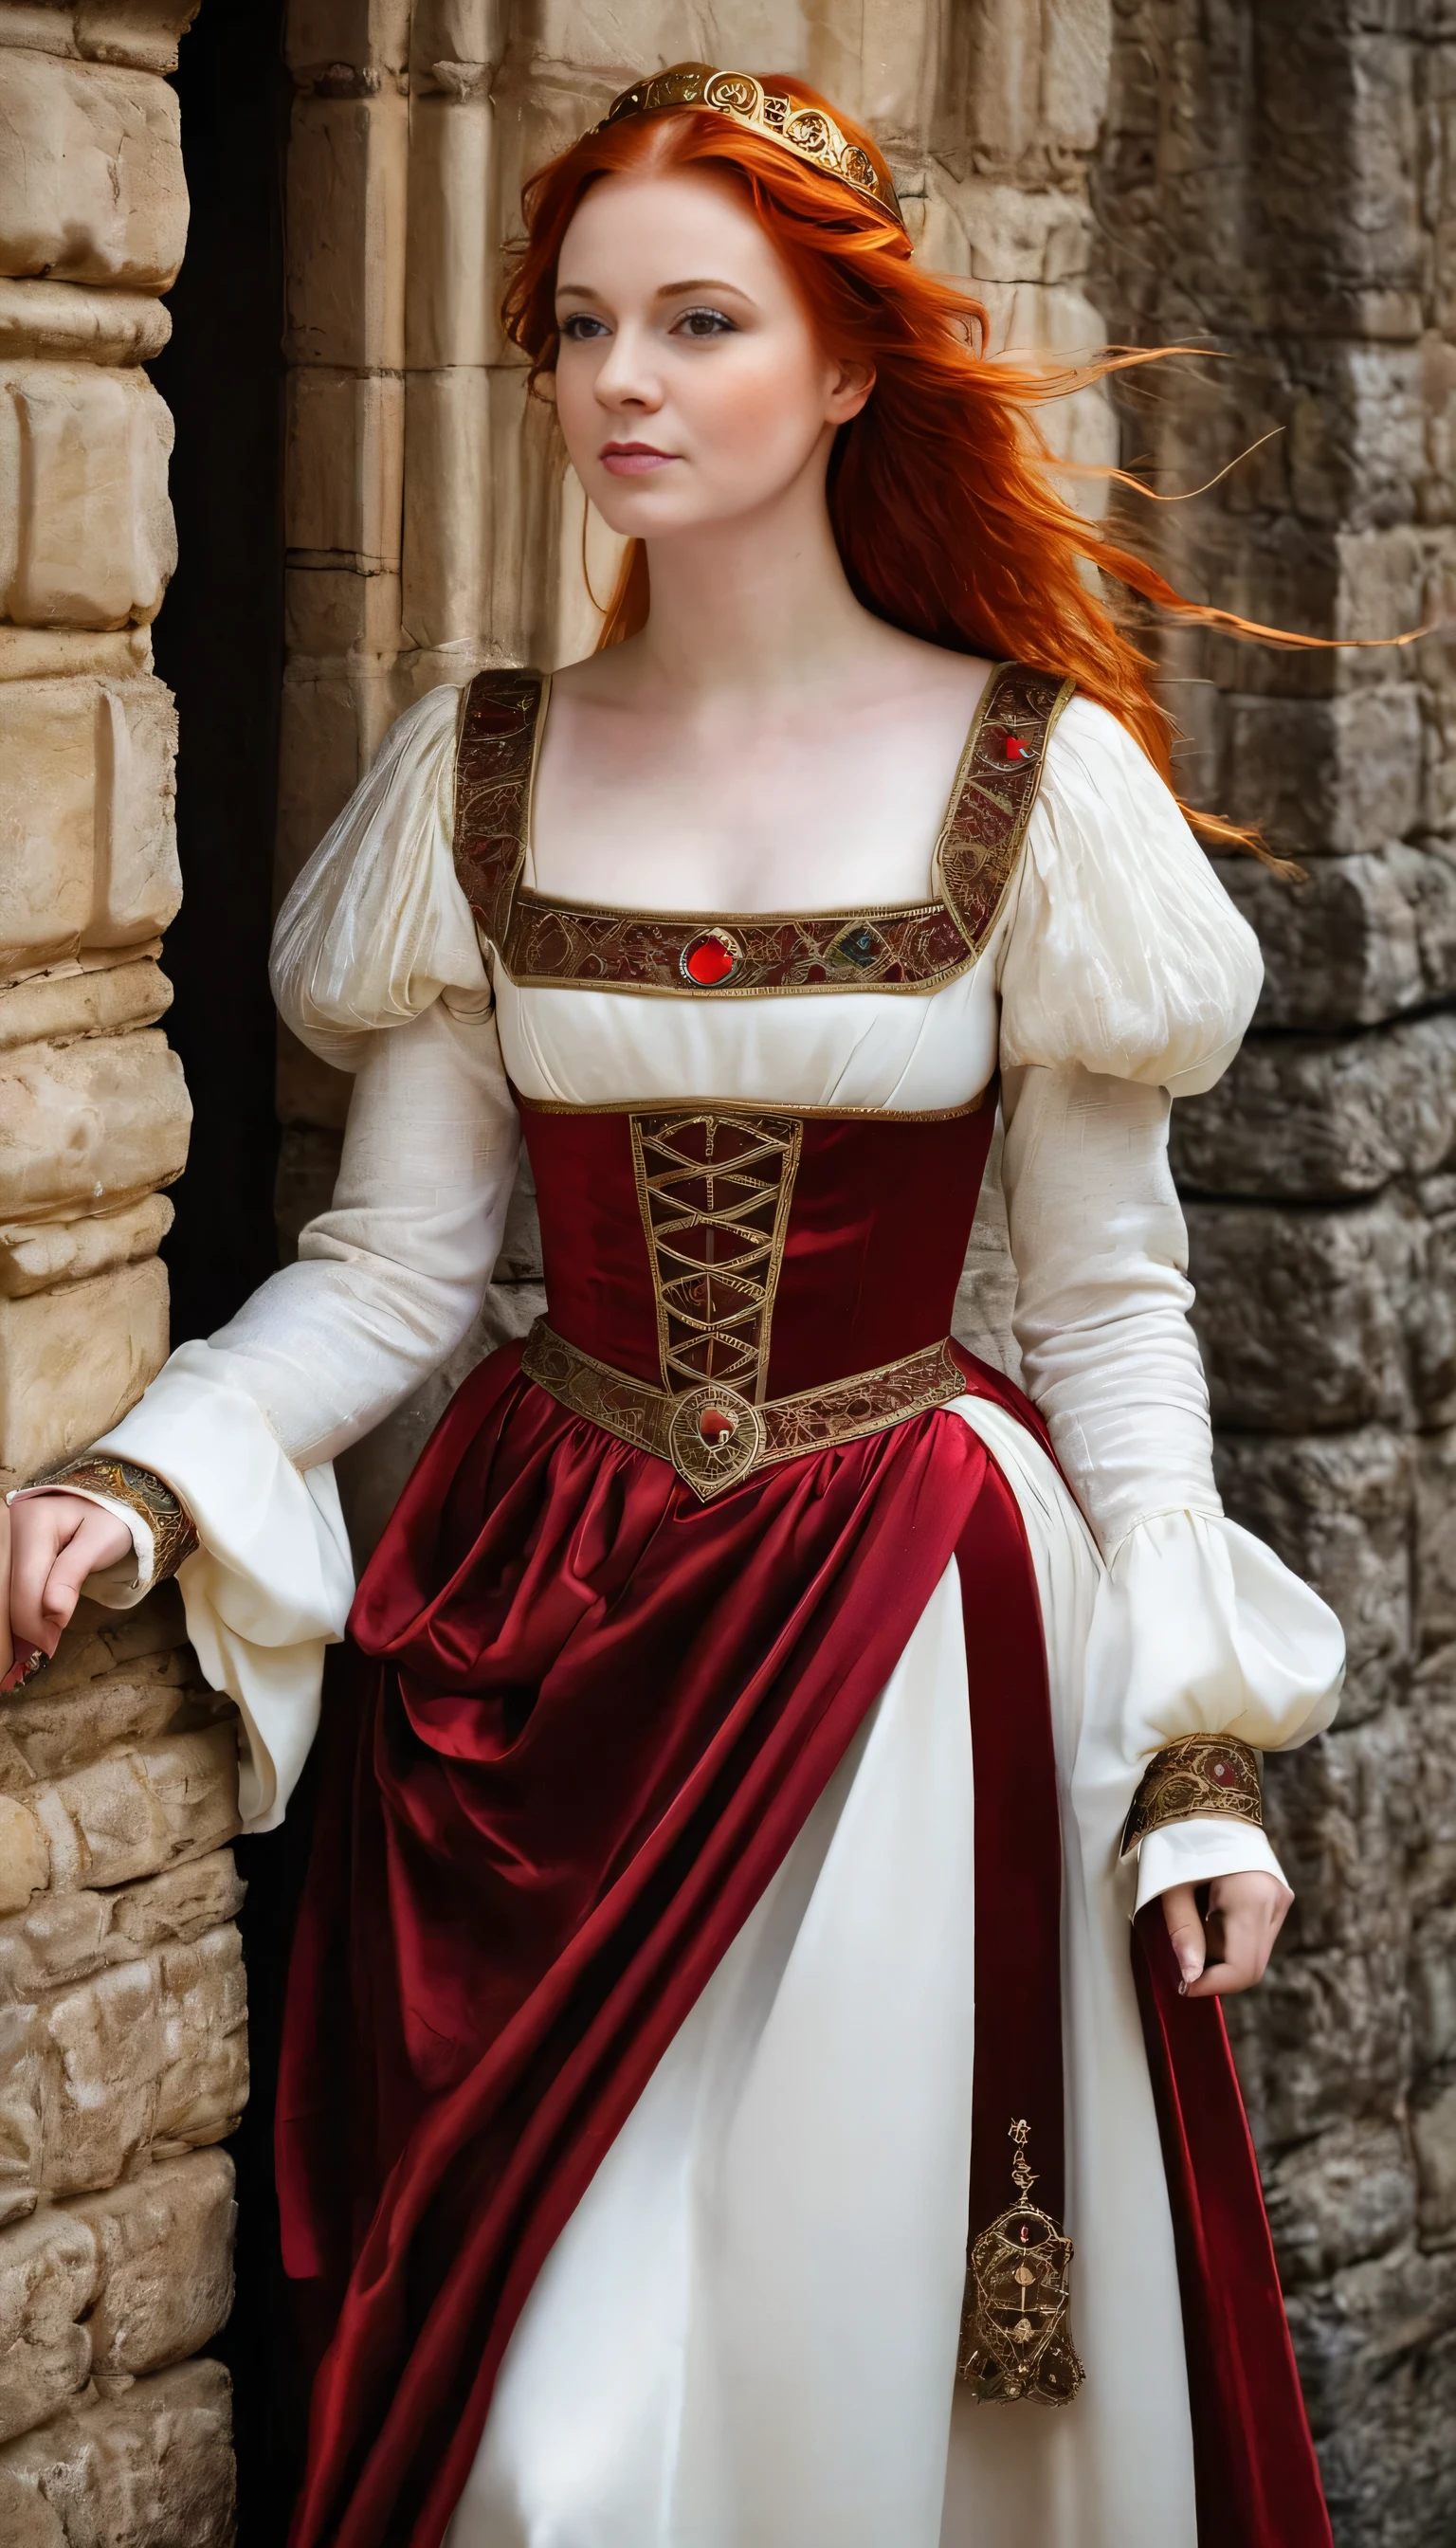 Amazingly beautiful Medieval dressed woman